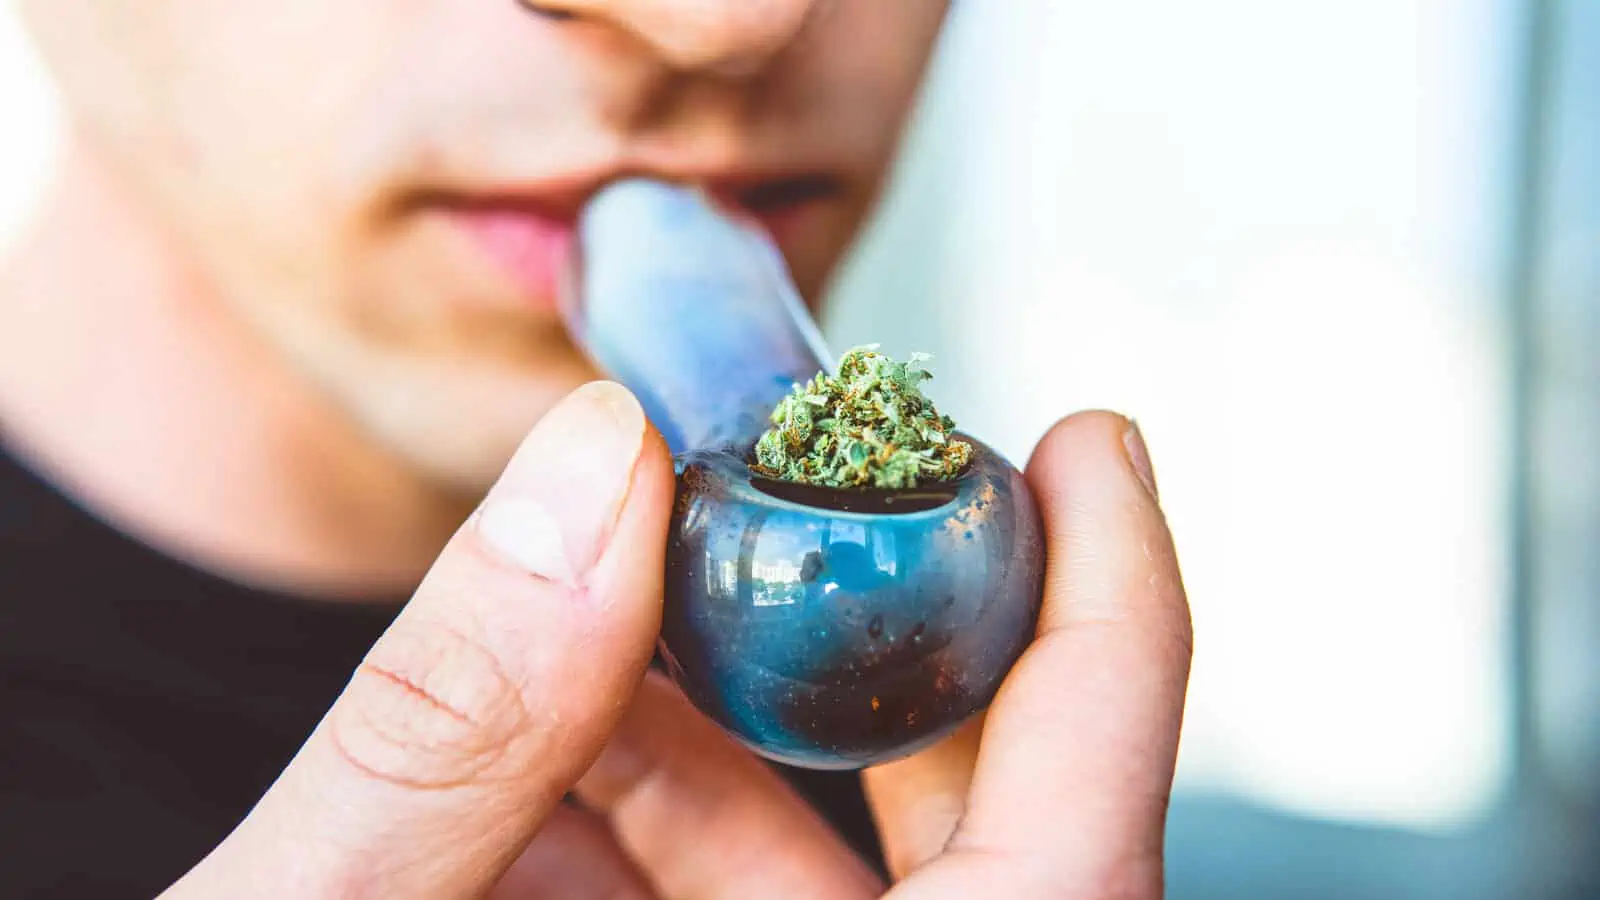 How to Inhale Weed: The Definitive Guide